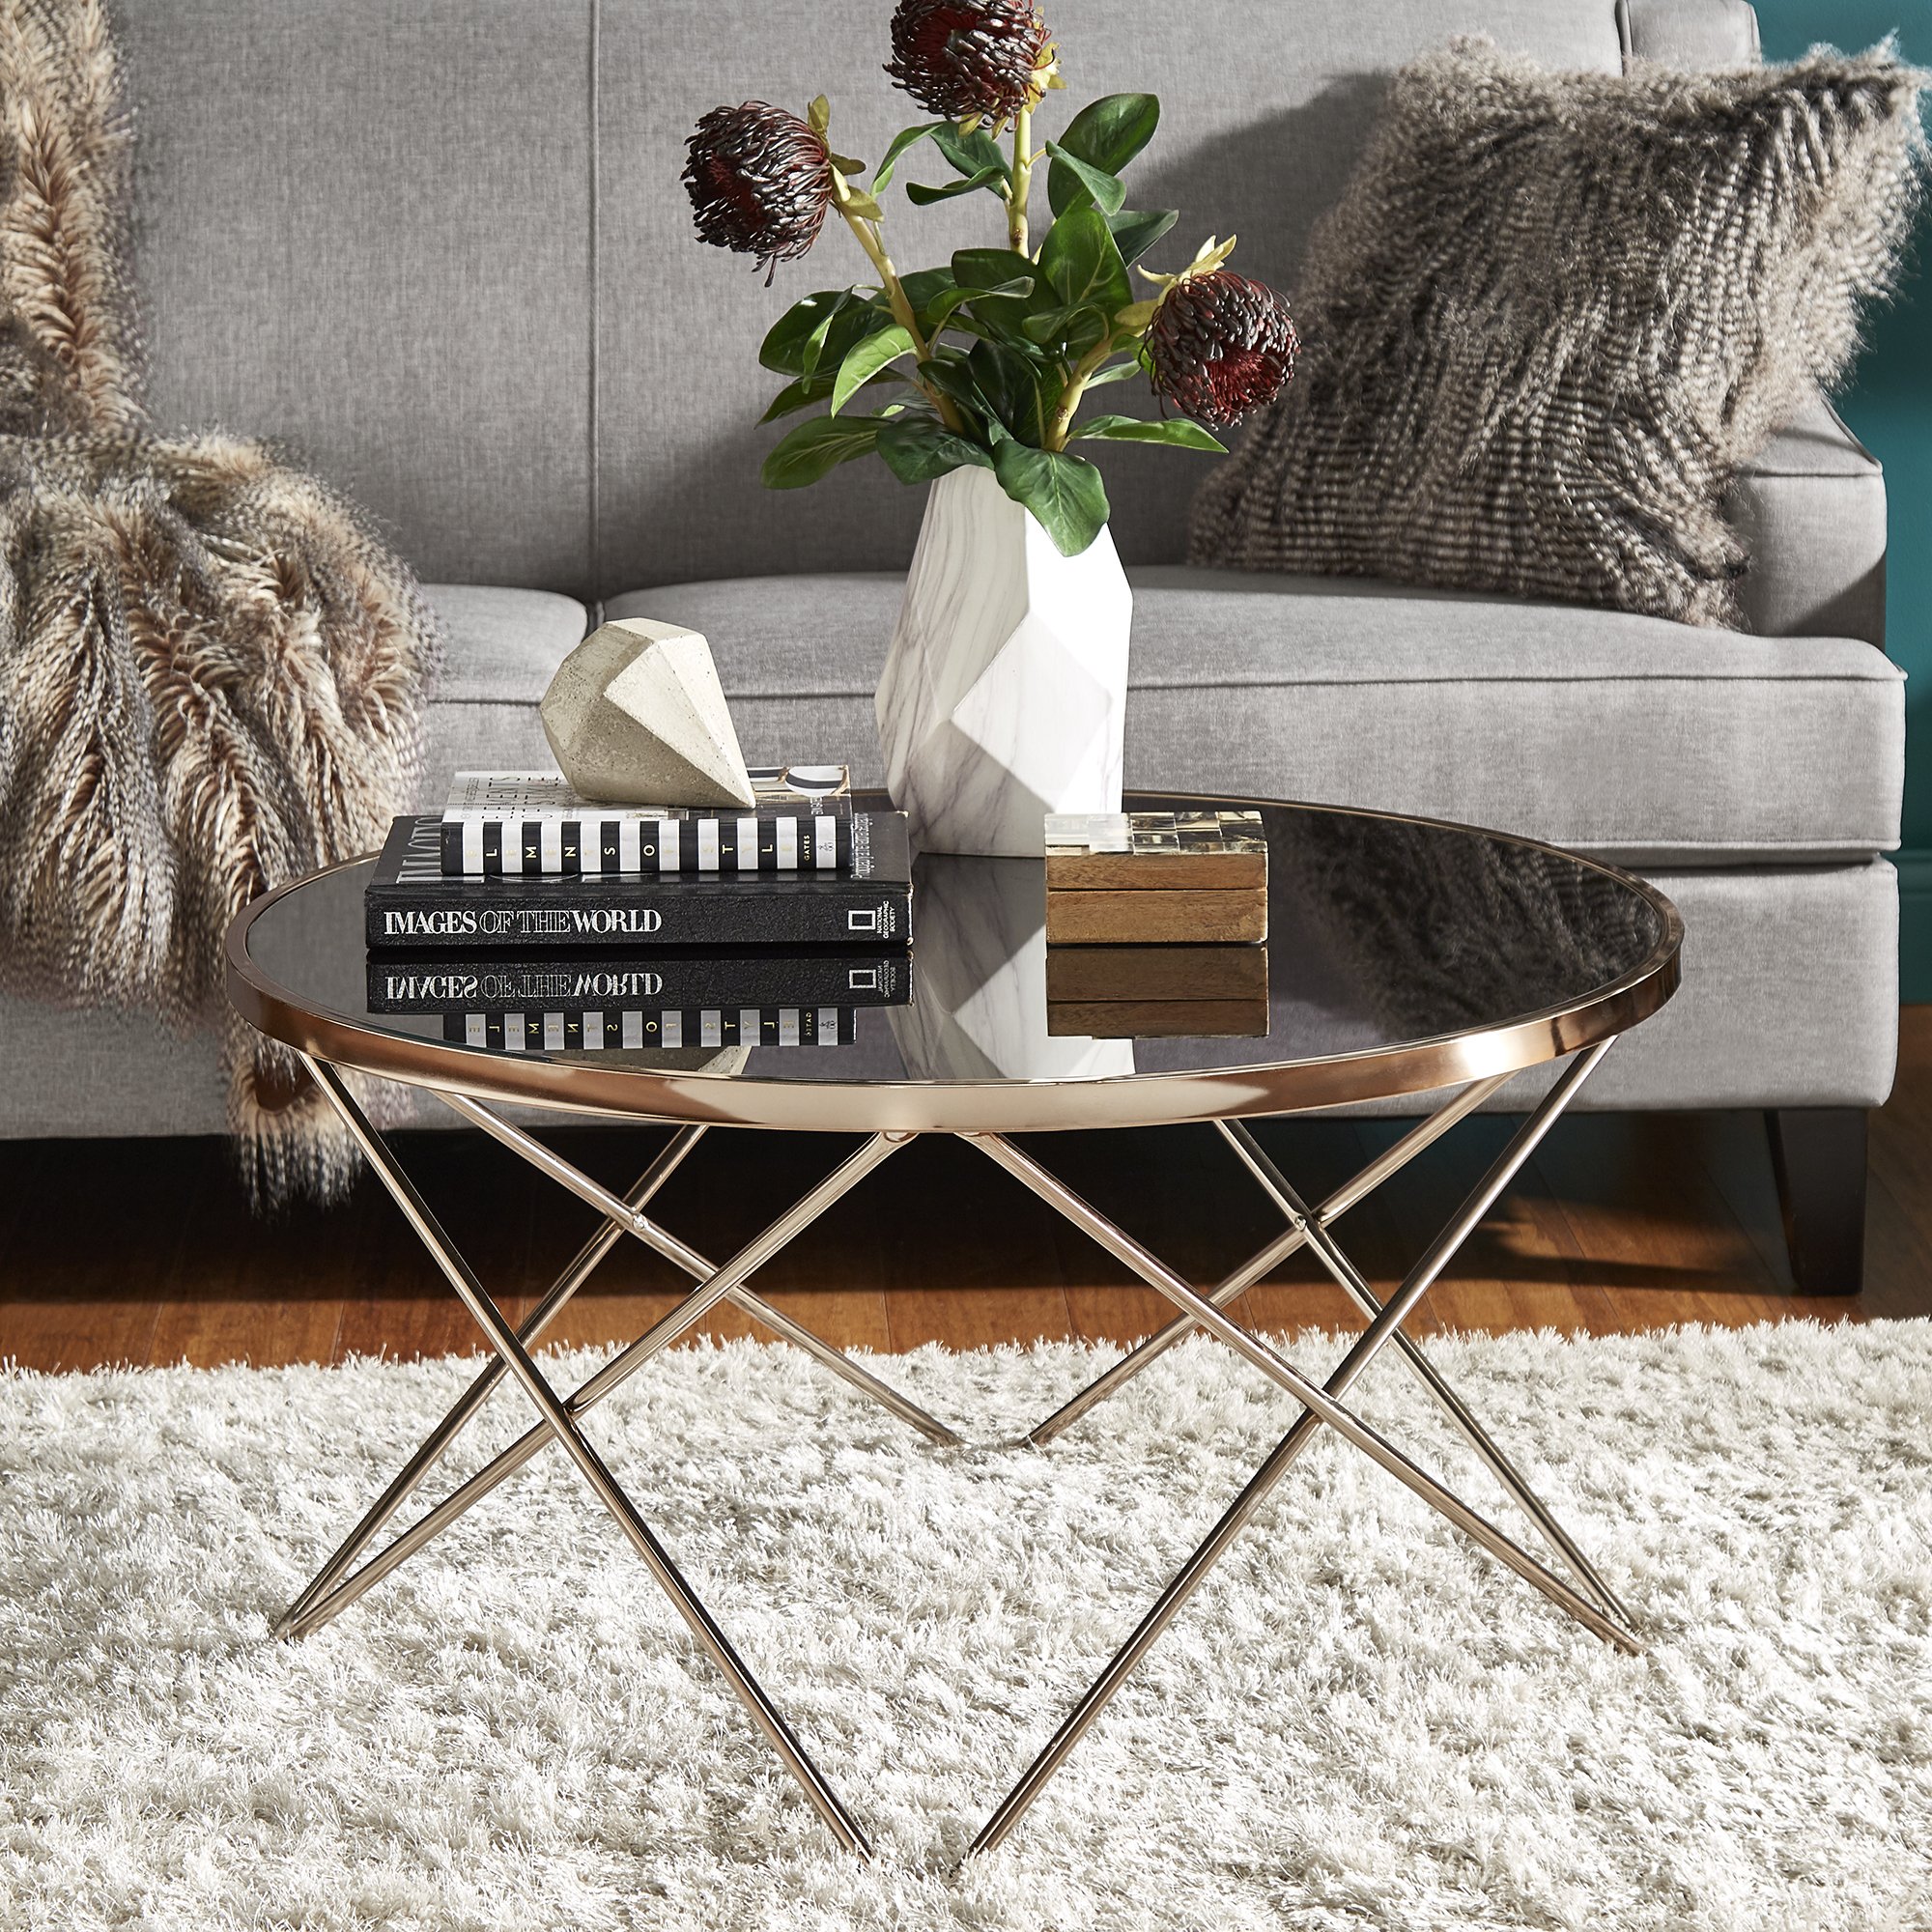 gabe champagne gold finish hairpin leg accent tables with black glass top inspire bold table free shipping today distressed console large concrete dining pier set silver lamps